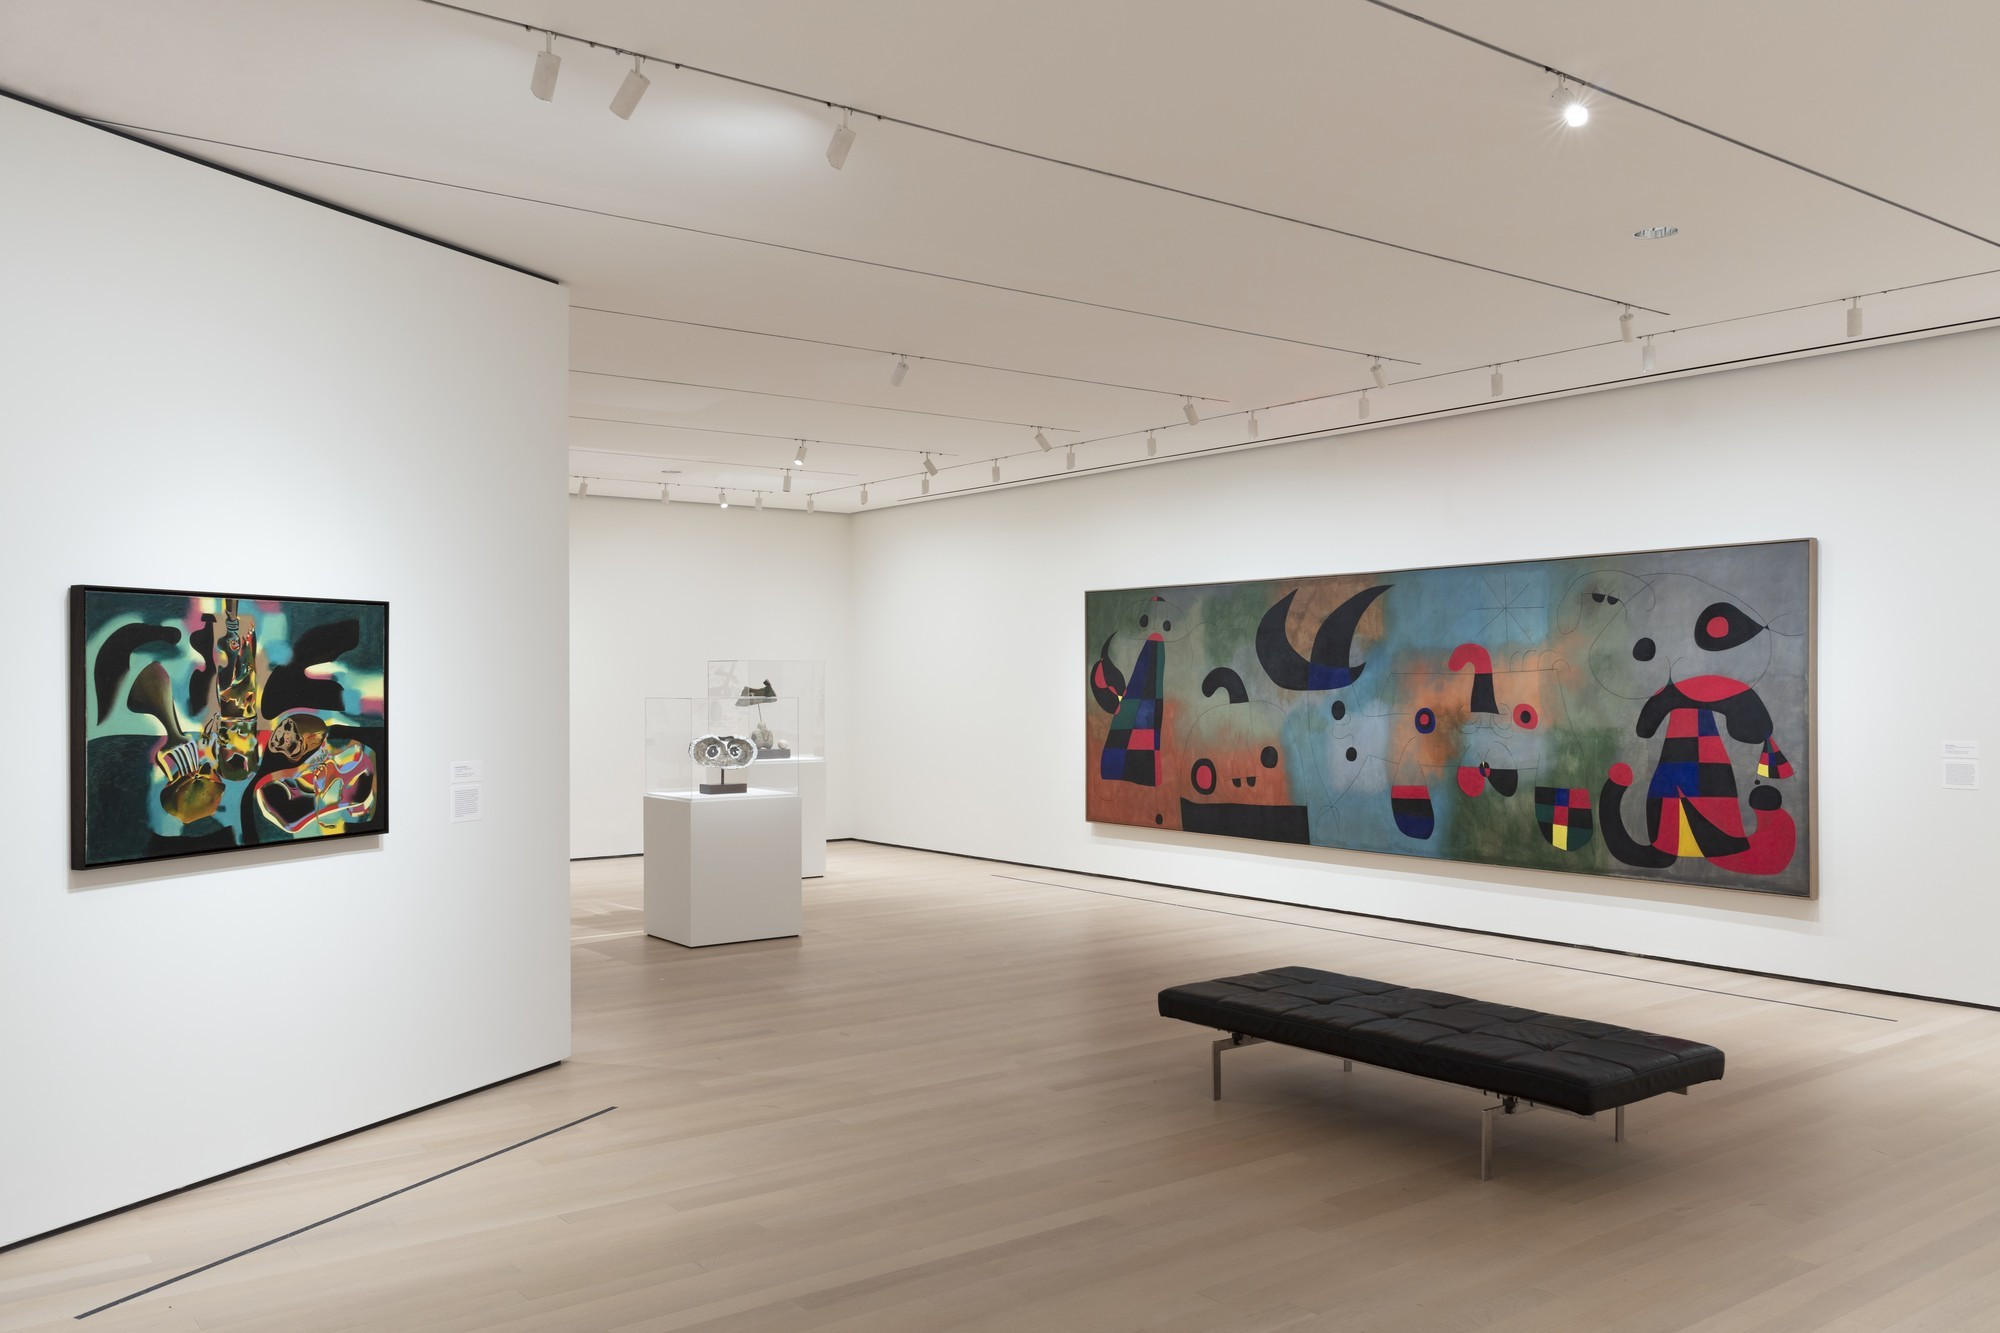 Installation view of the exhibition “Joan Miró: Birth of the World”. Photograph by Denis Doorly. 2019